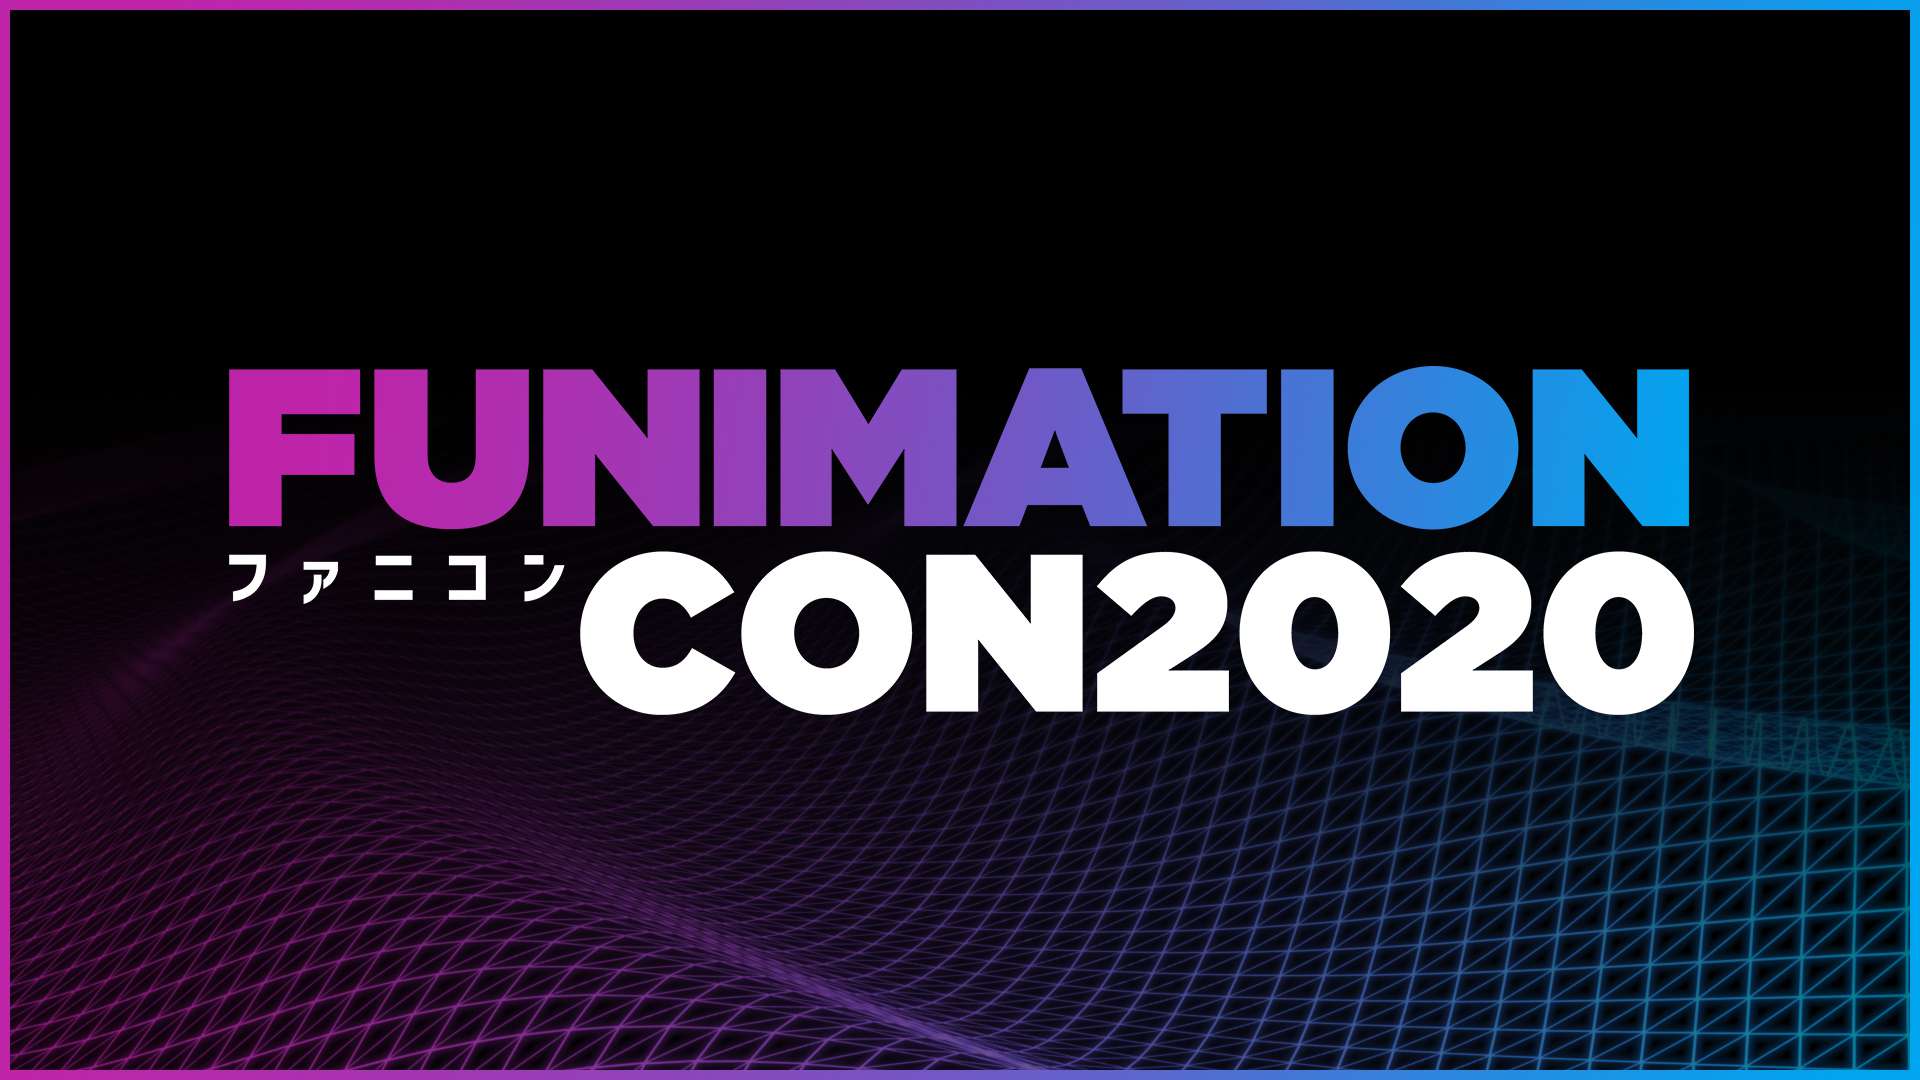 Taboola Ad Example 38134 - Funimation Reveals Online Anime Convention, FunimationCon